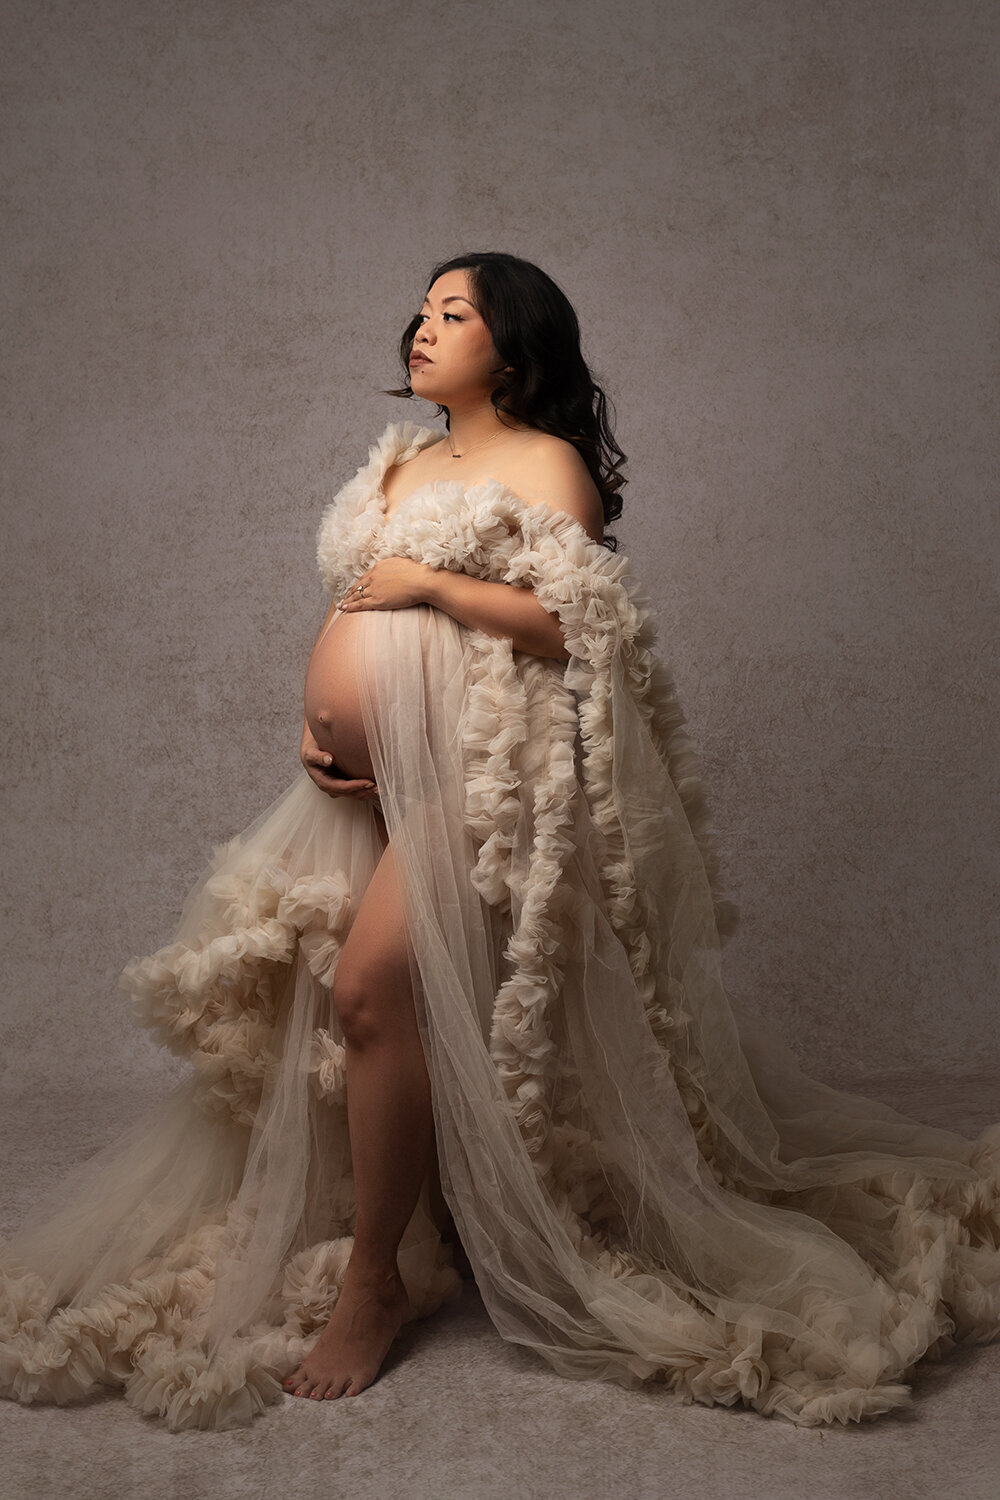 New-Orleans-maternity-photographer-5